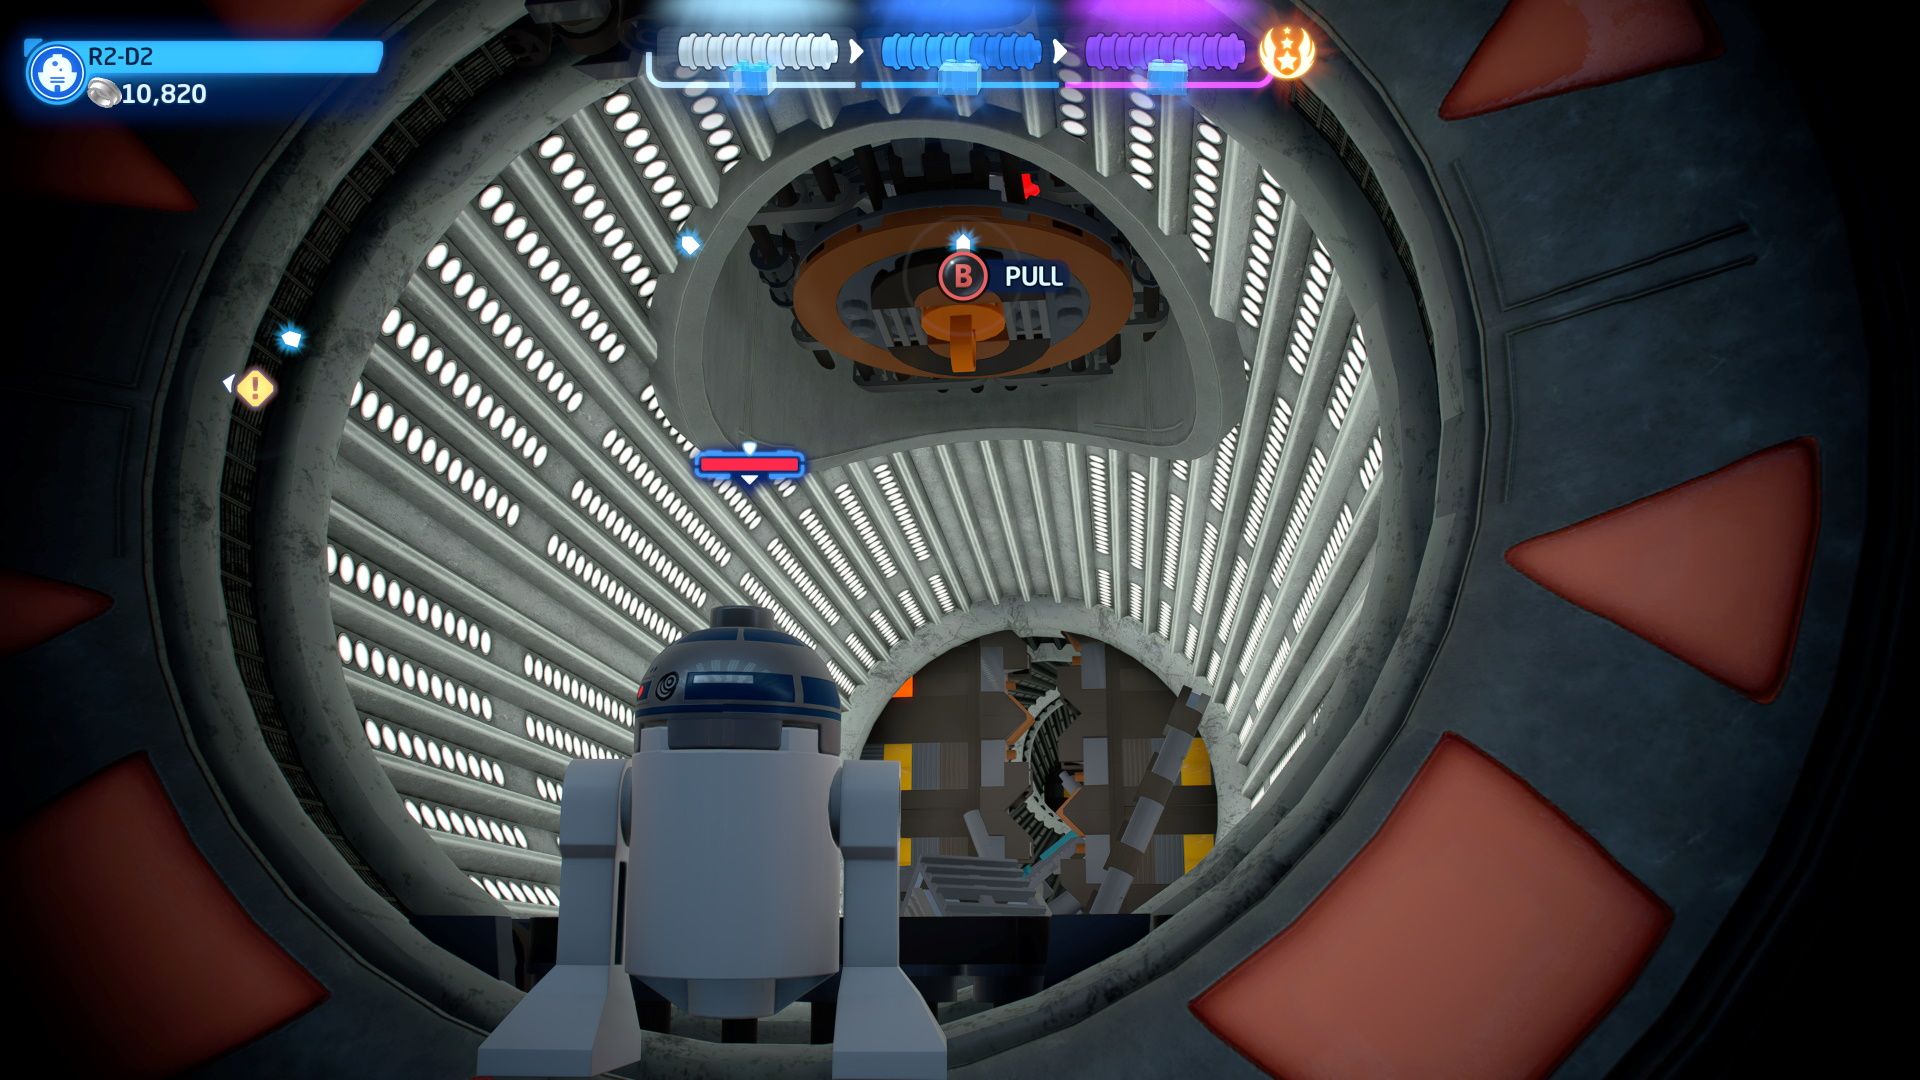 Using R2-D2 to get the Ceiling Hatch Minikit